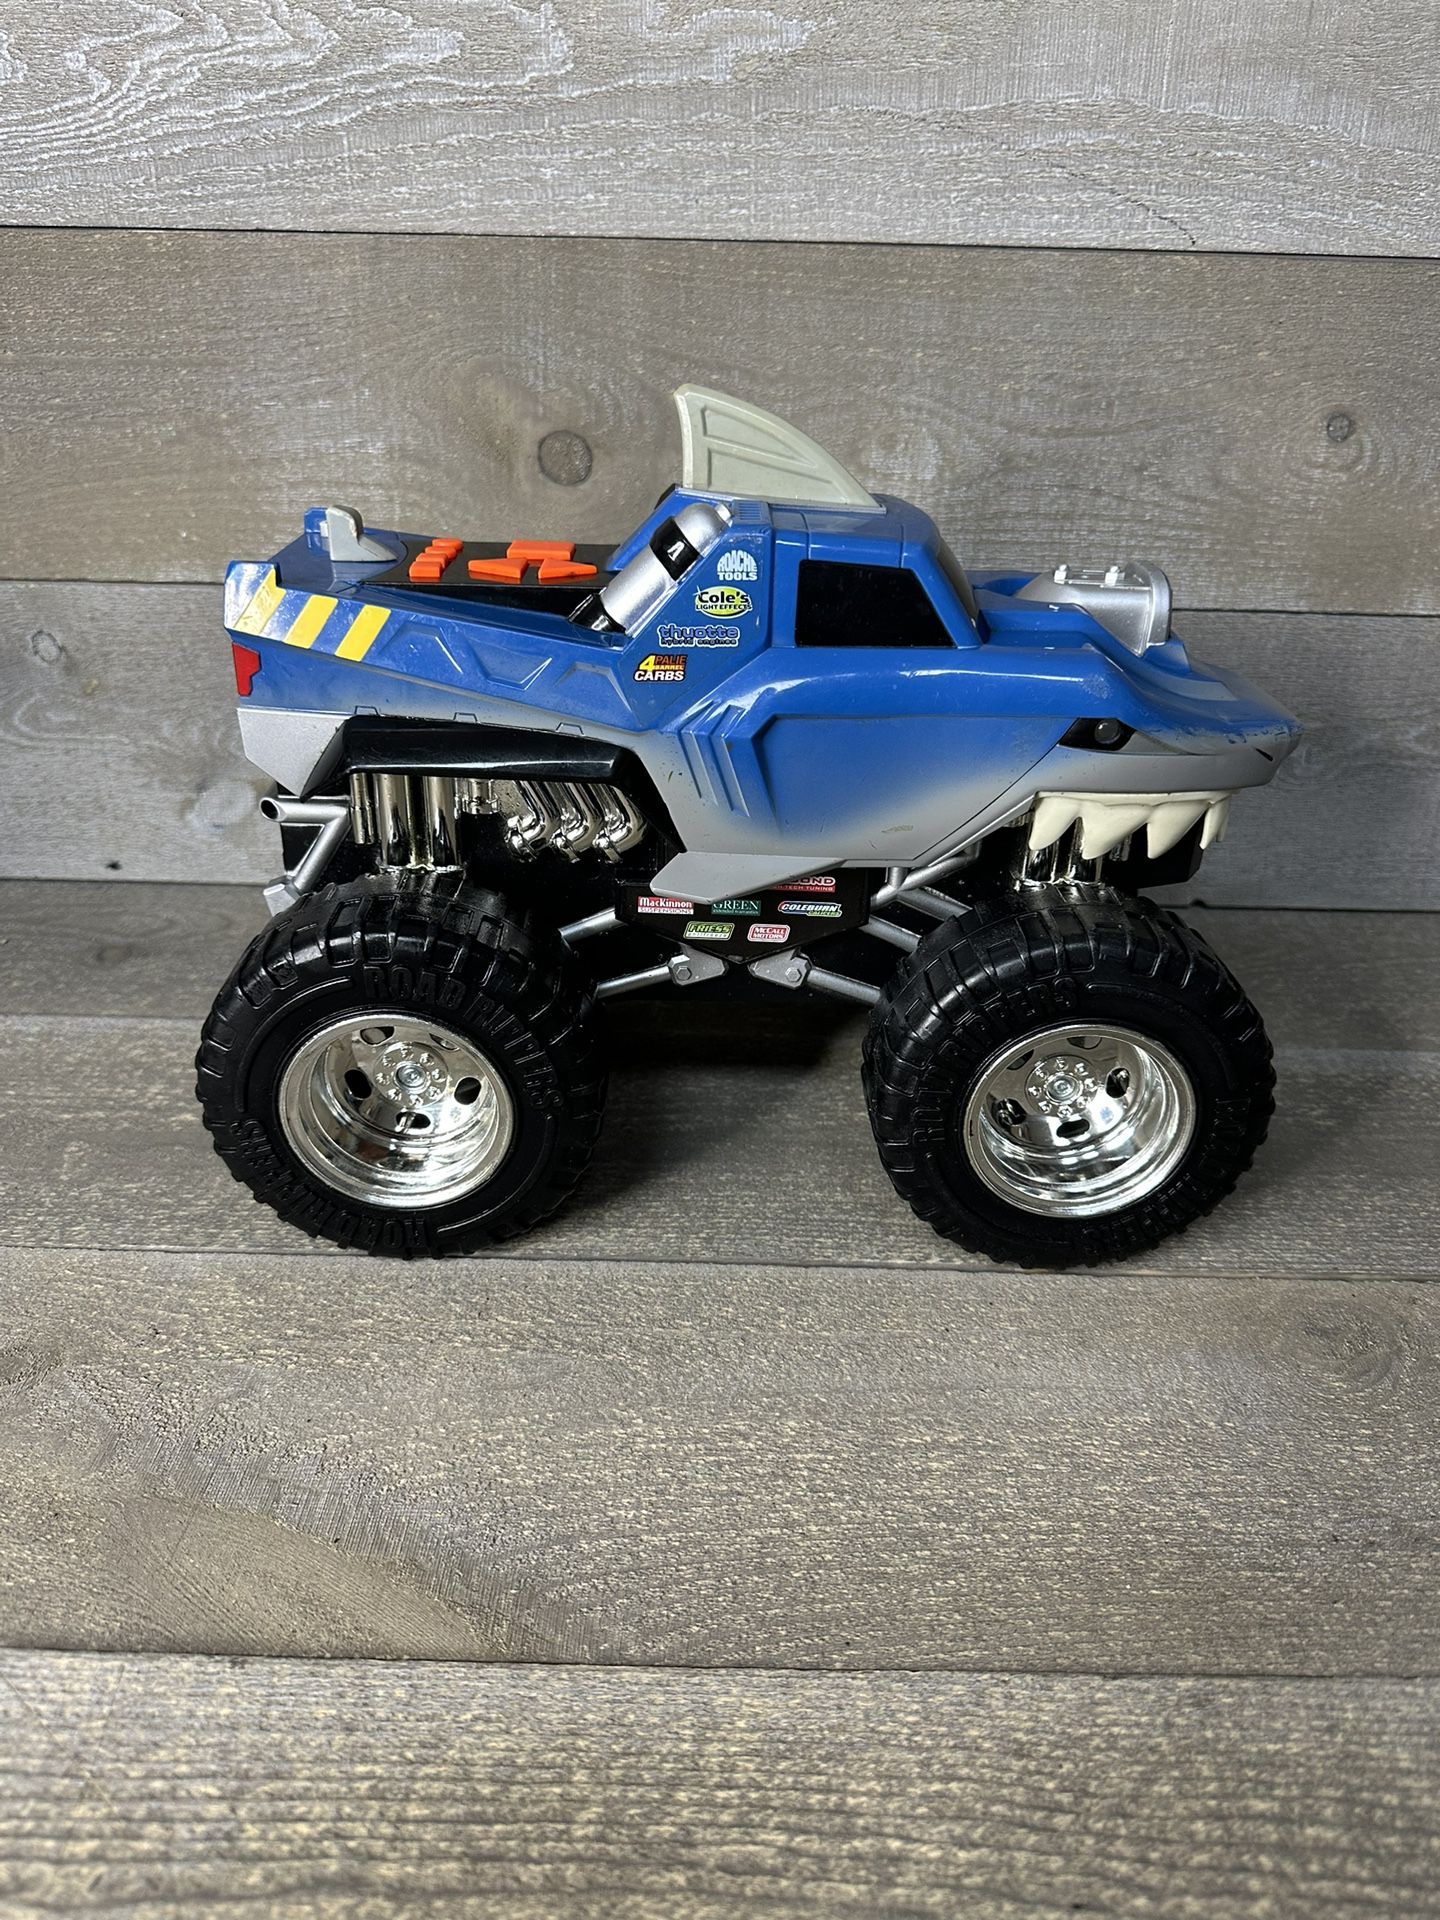 Toy State Road Rippers Shark Attack Monster Truck Lights Sounds 13”x9”x7”